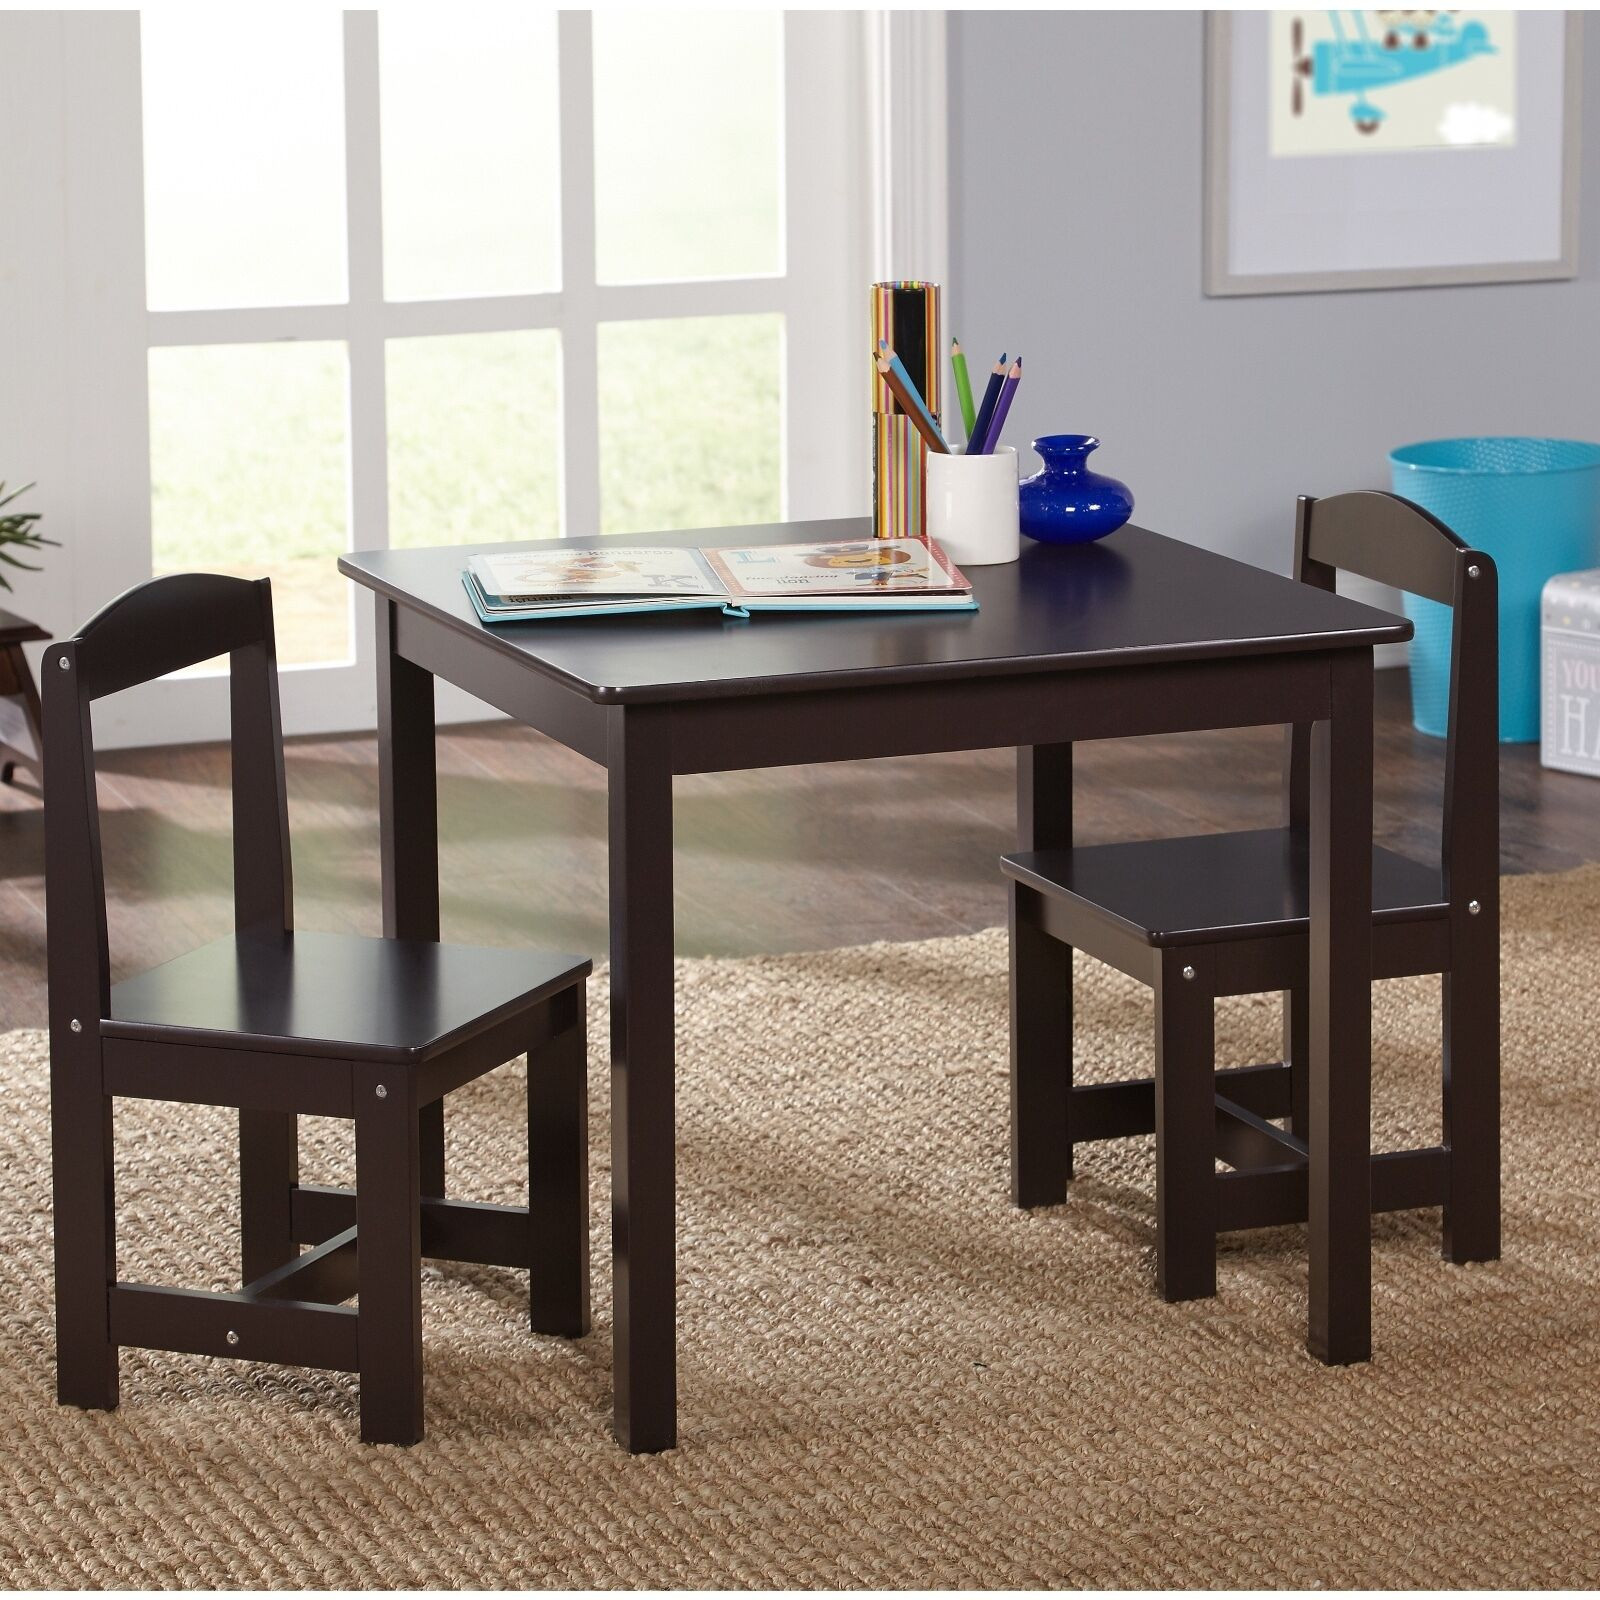 Kids Table And Chair Set
 Study Small Table and Chair Set Generic 3 Piece Wood